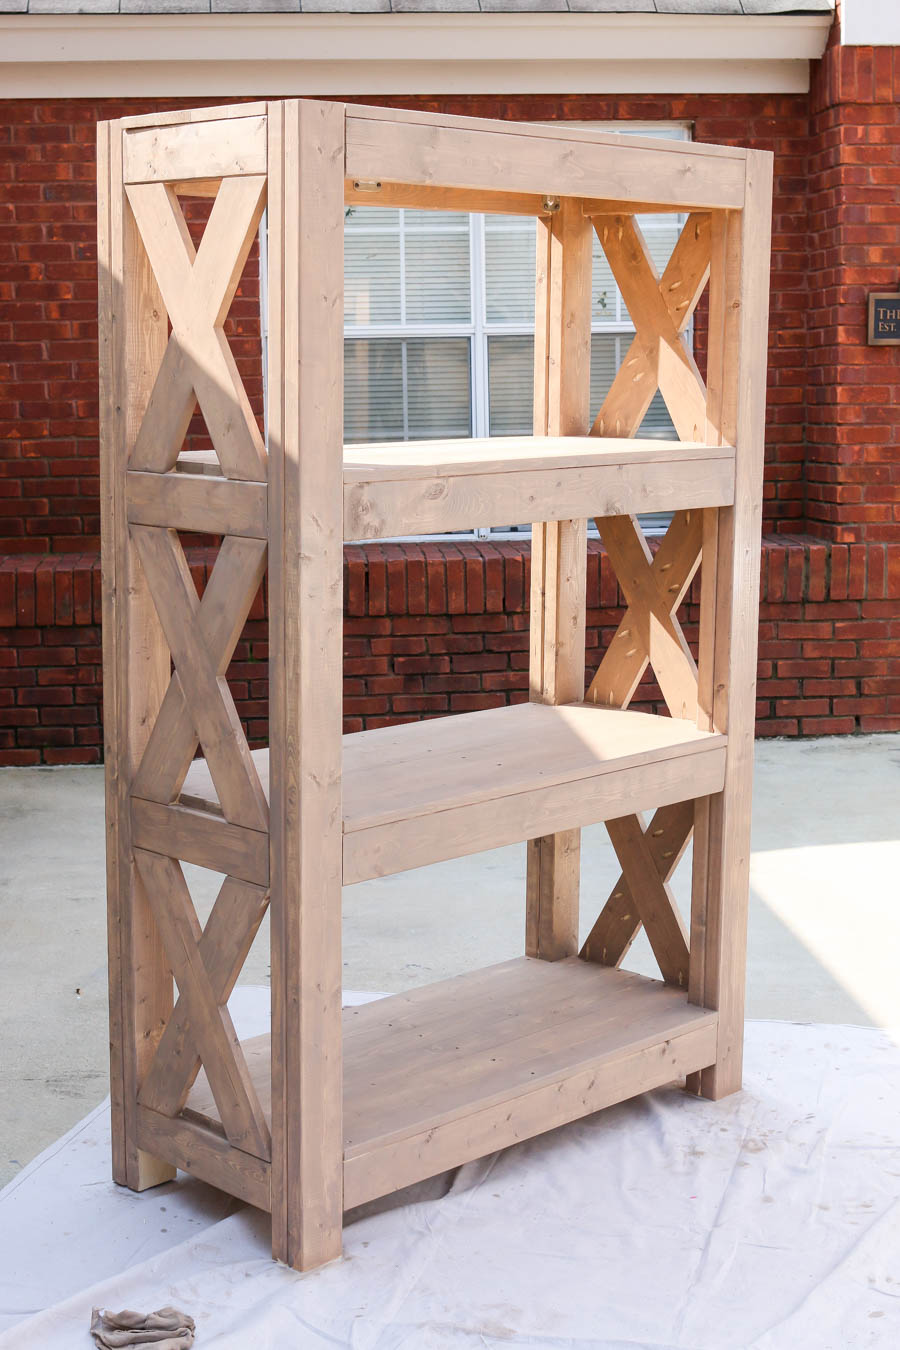 How to build a DIY bookshelf with Simpson Strong-Tie